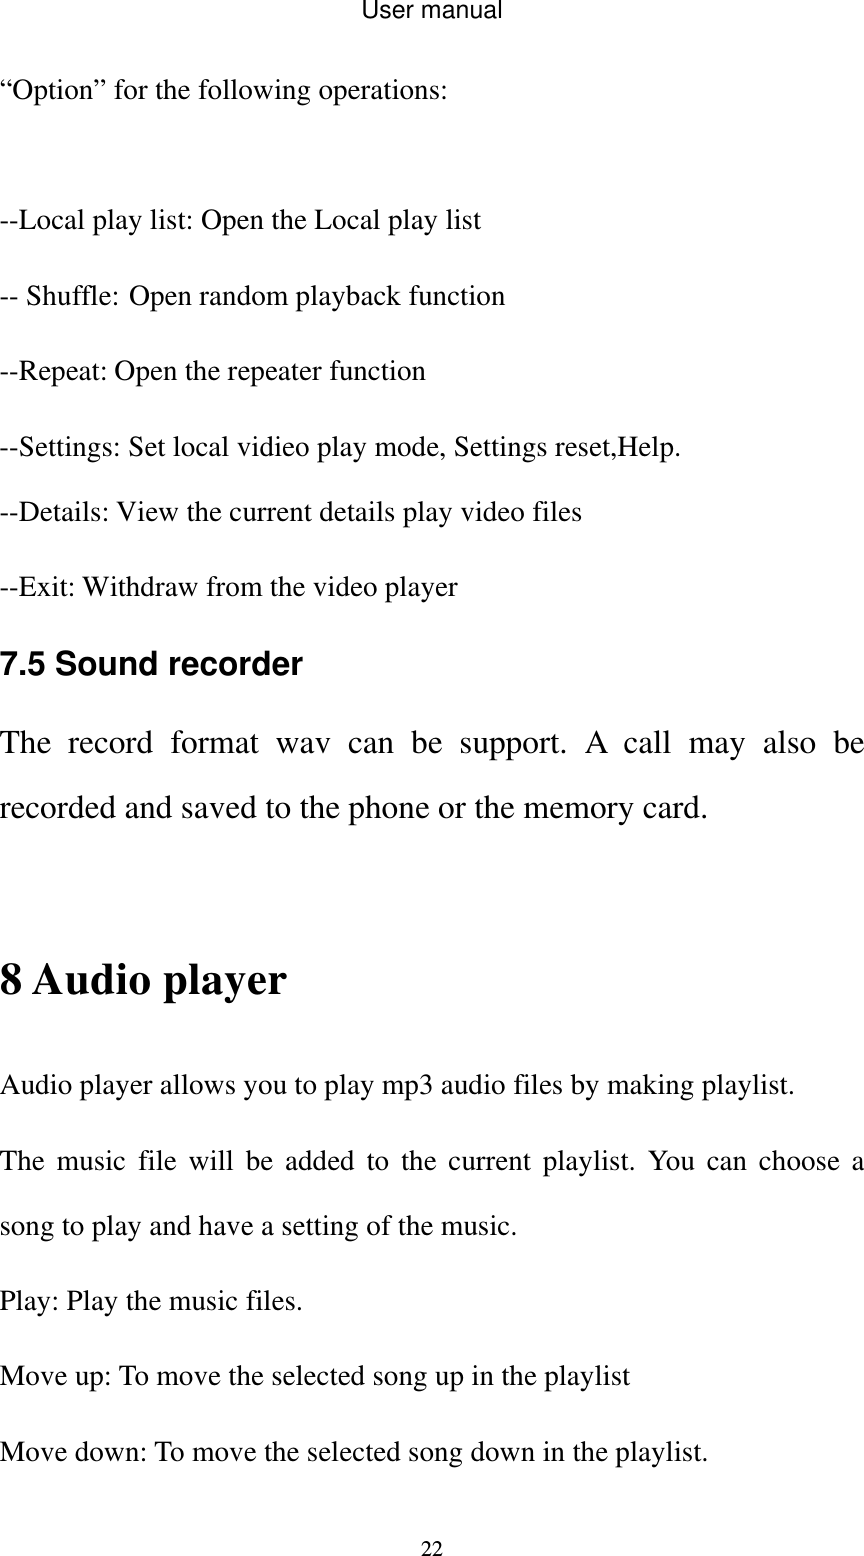 User manual  22“Option” for the following operations:  --Local play list: Open the Local play list -- Shuffle: Open random playback function --Repeat: Open the repeater function --Settings: Set local vidieo play mode, Settings reset,Help. --Details: View the current details play video files --Exit: Withdraw from the video player 7.5 Sound recorder The record format wav can be support. A call may also be recorded and saved to the phone or the memory card.  8 Audio player Audio player allows you to play mp3 audio files by making playlist. The music file will be added to the current playlist. You can choose a song to play and have a setting of the music. Play: Play the music files. Move up: To move the selected song up in the playlist Move down: To move the selected song down in the playlist. 